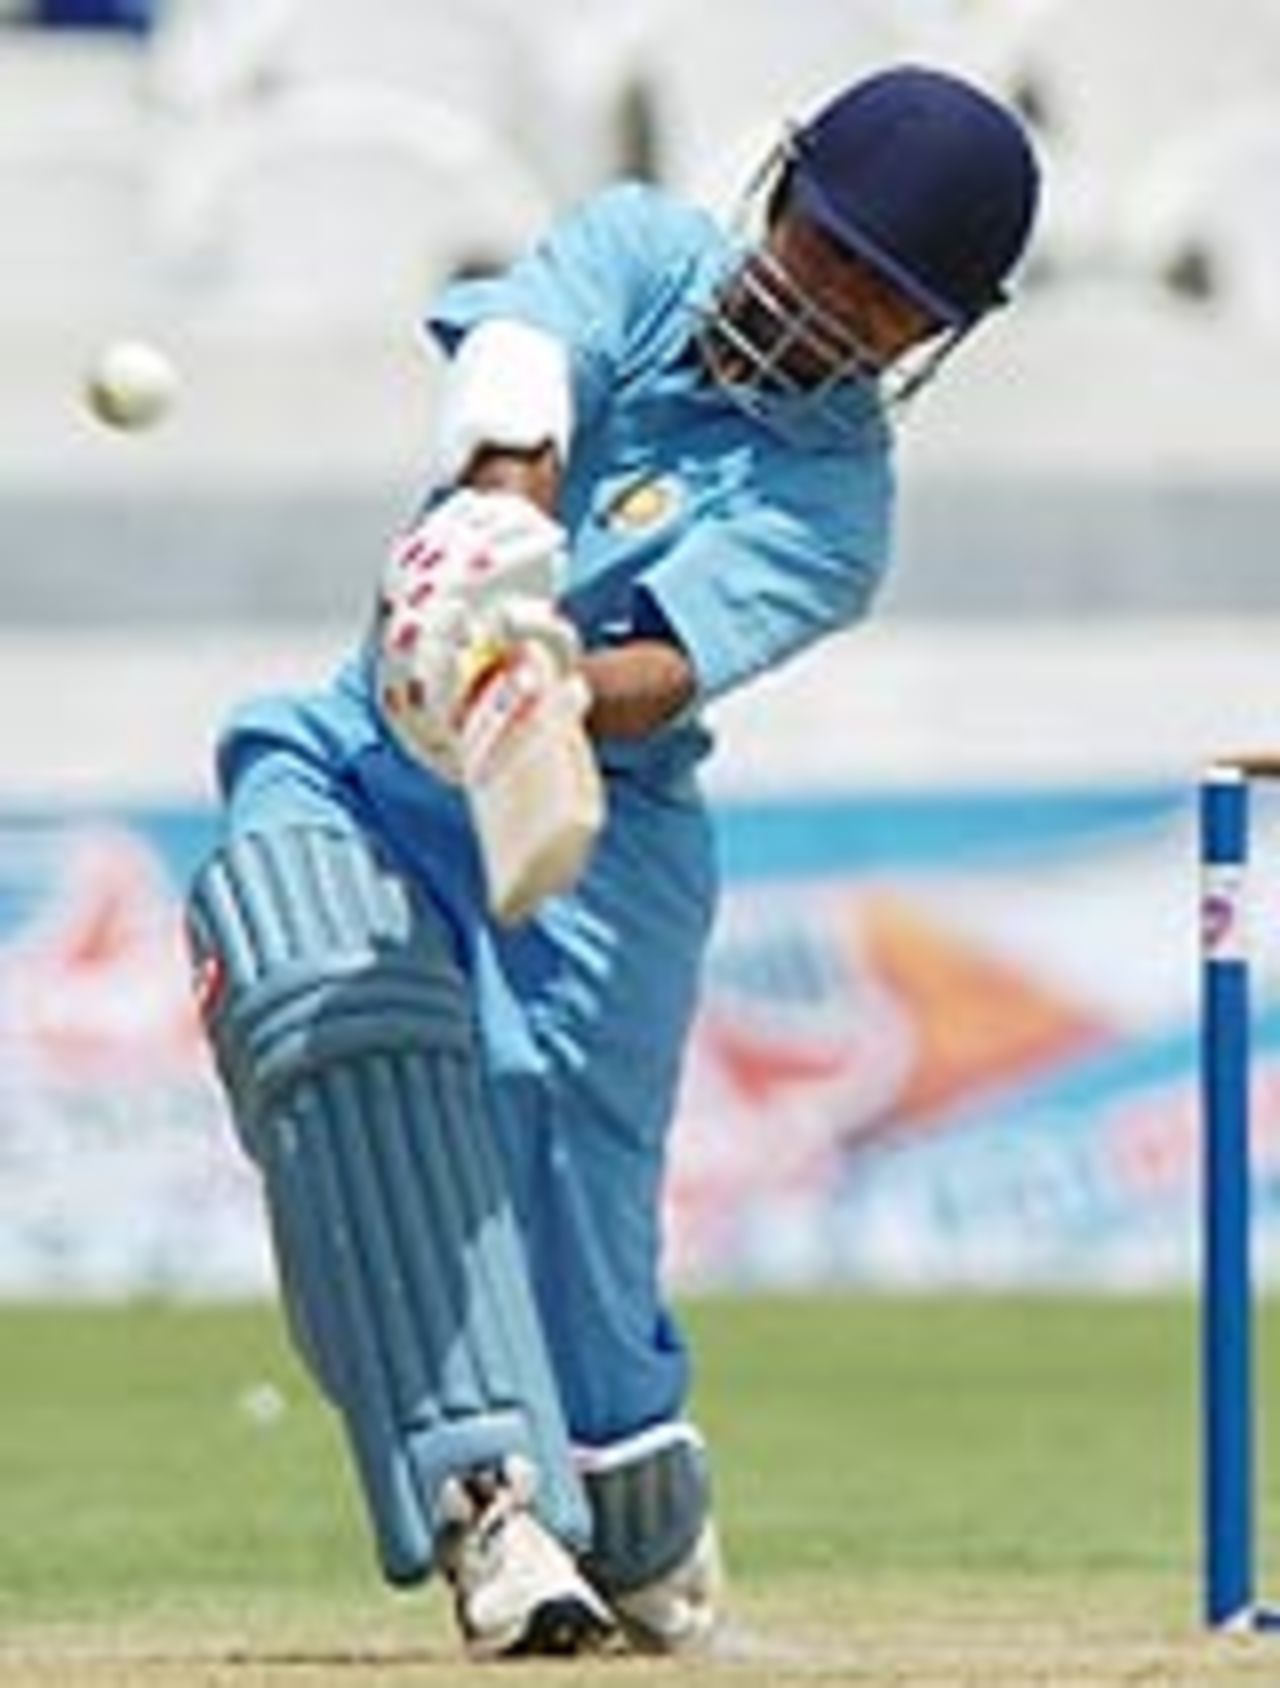 Suresh Raina plays a shot in Pakistan's warm-up against India A, Hyderabad, March 30, 2005